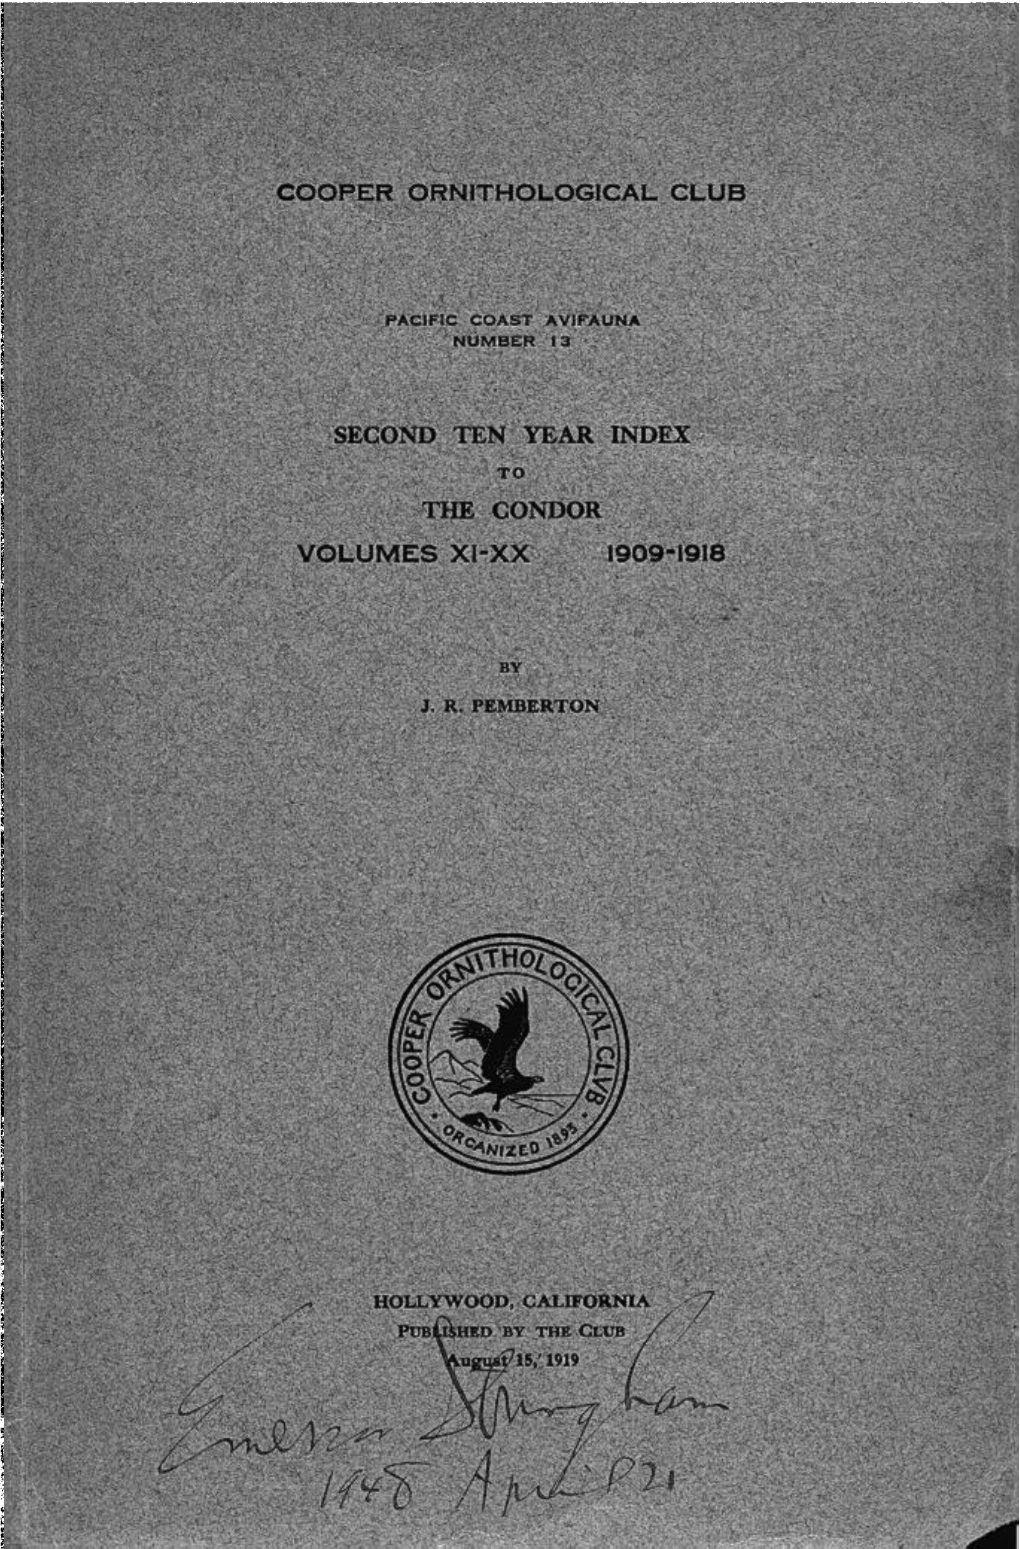 Second Ten Year Index to the Condor Volumes XI-XX 1909-1918